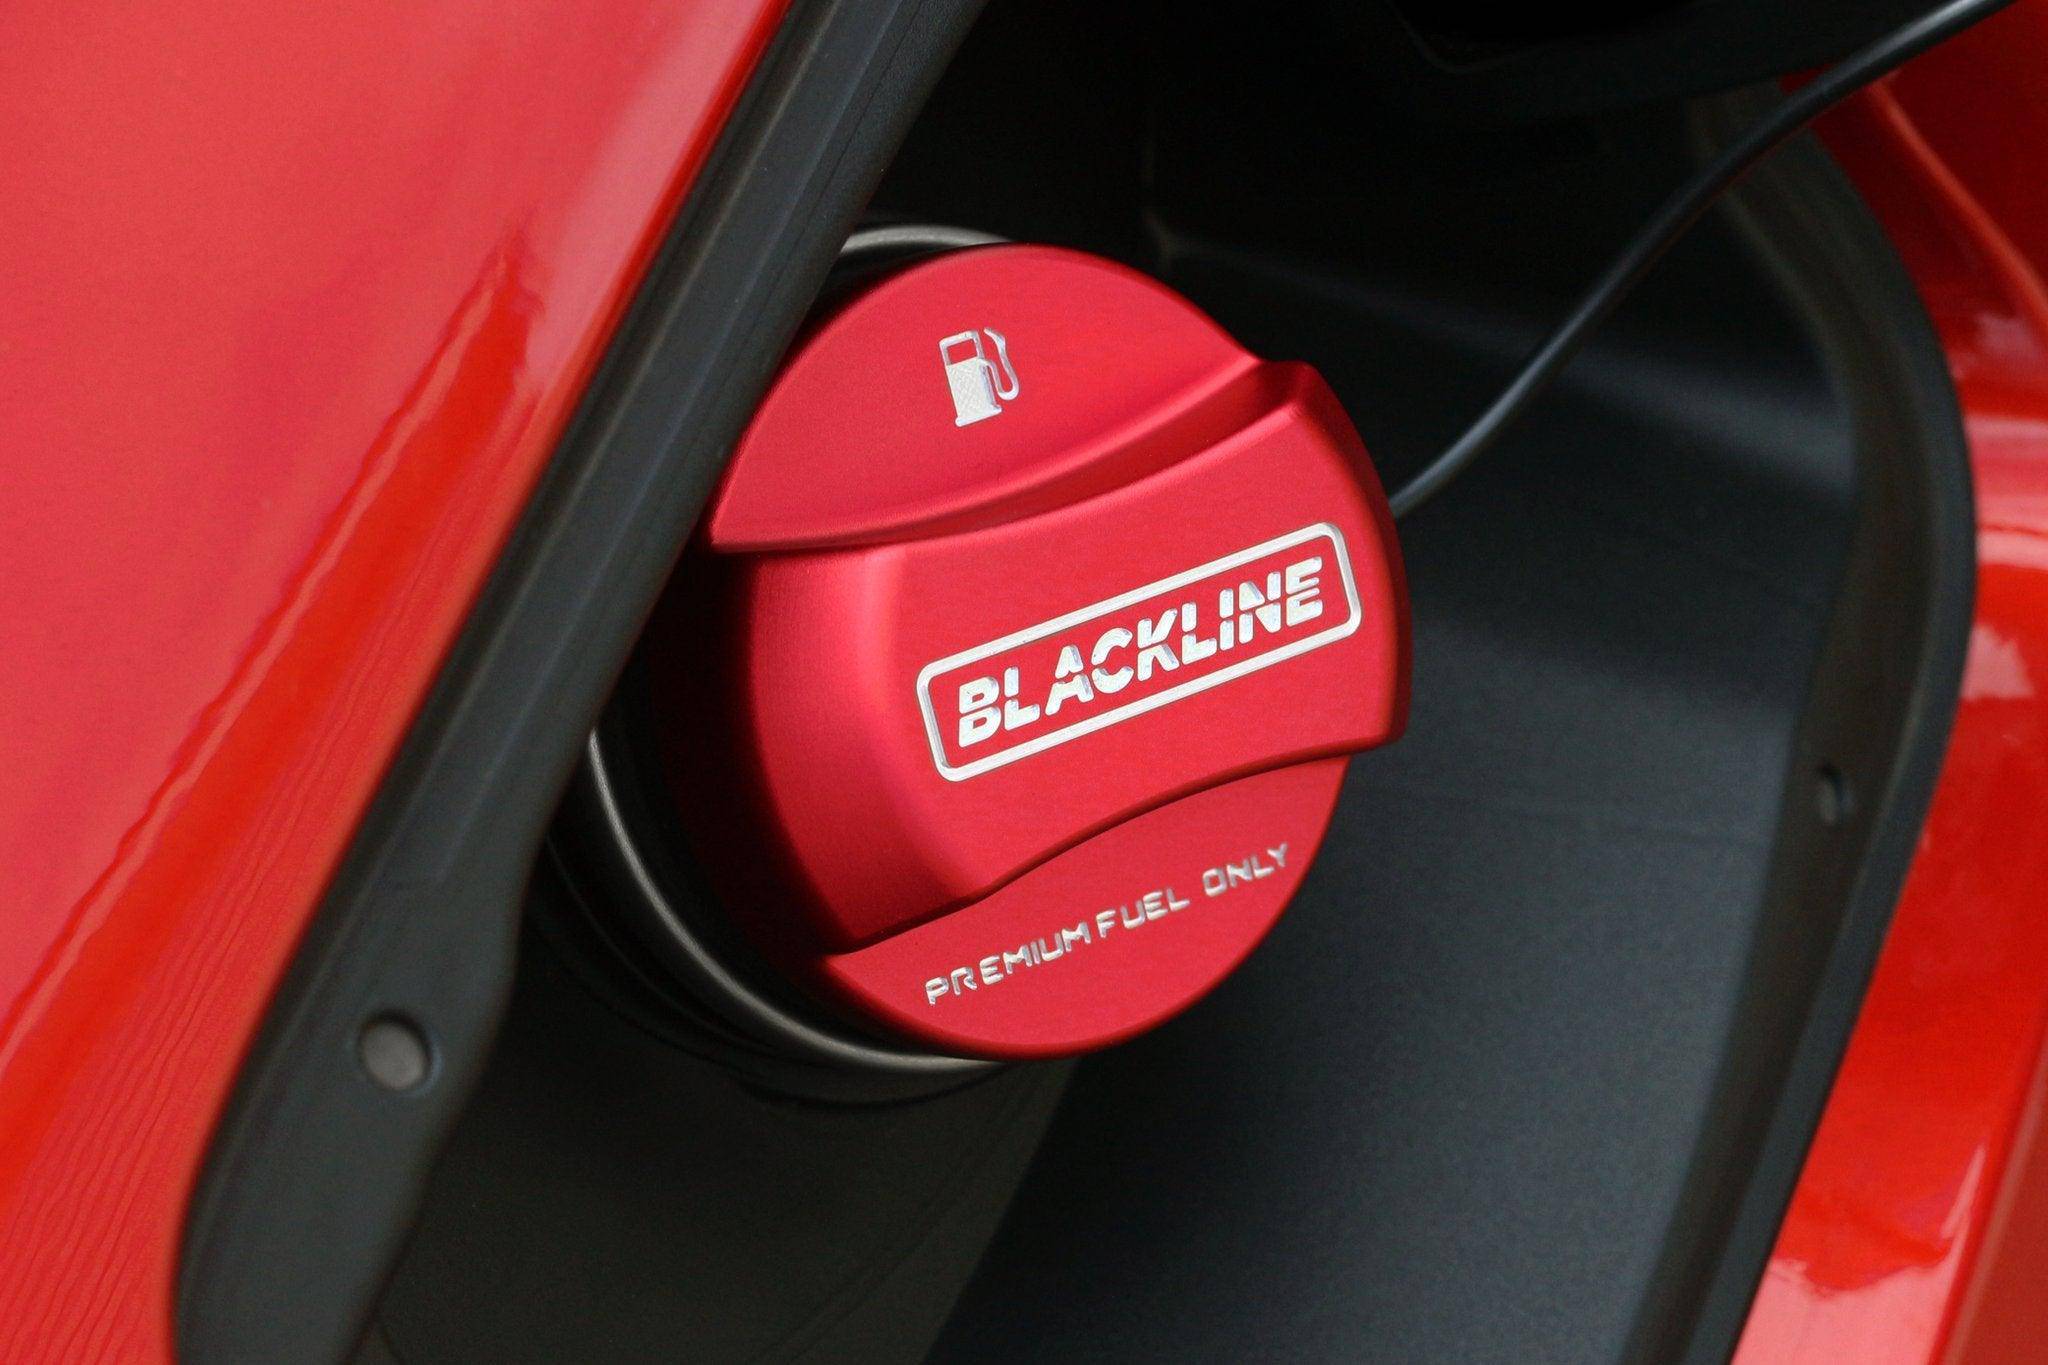 BLACKLINE Performance Fuel Cap Cover for BMW (2010+), Vehicle Dress Up Caps & Covers, Goldenwrench Supply - AUTOID | Premium Automotive Accessories